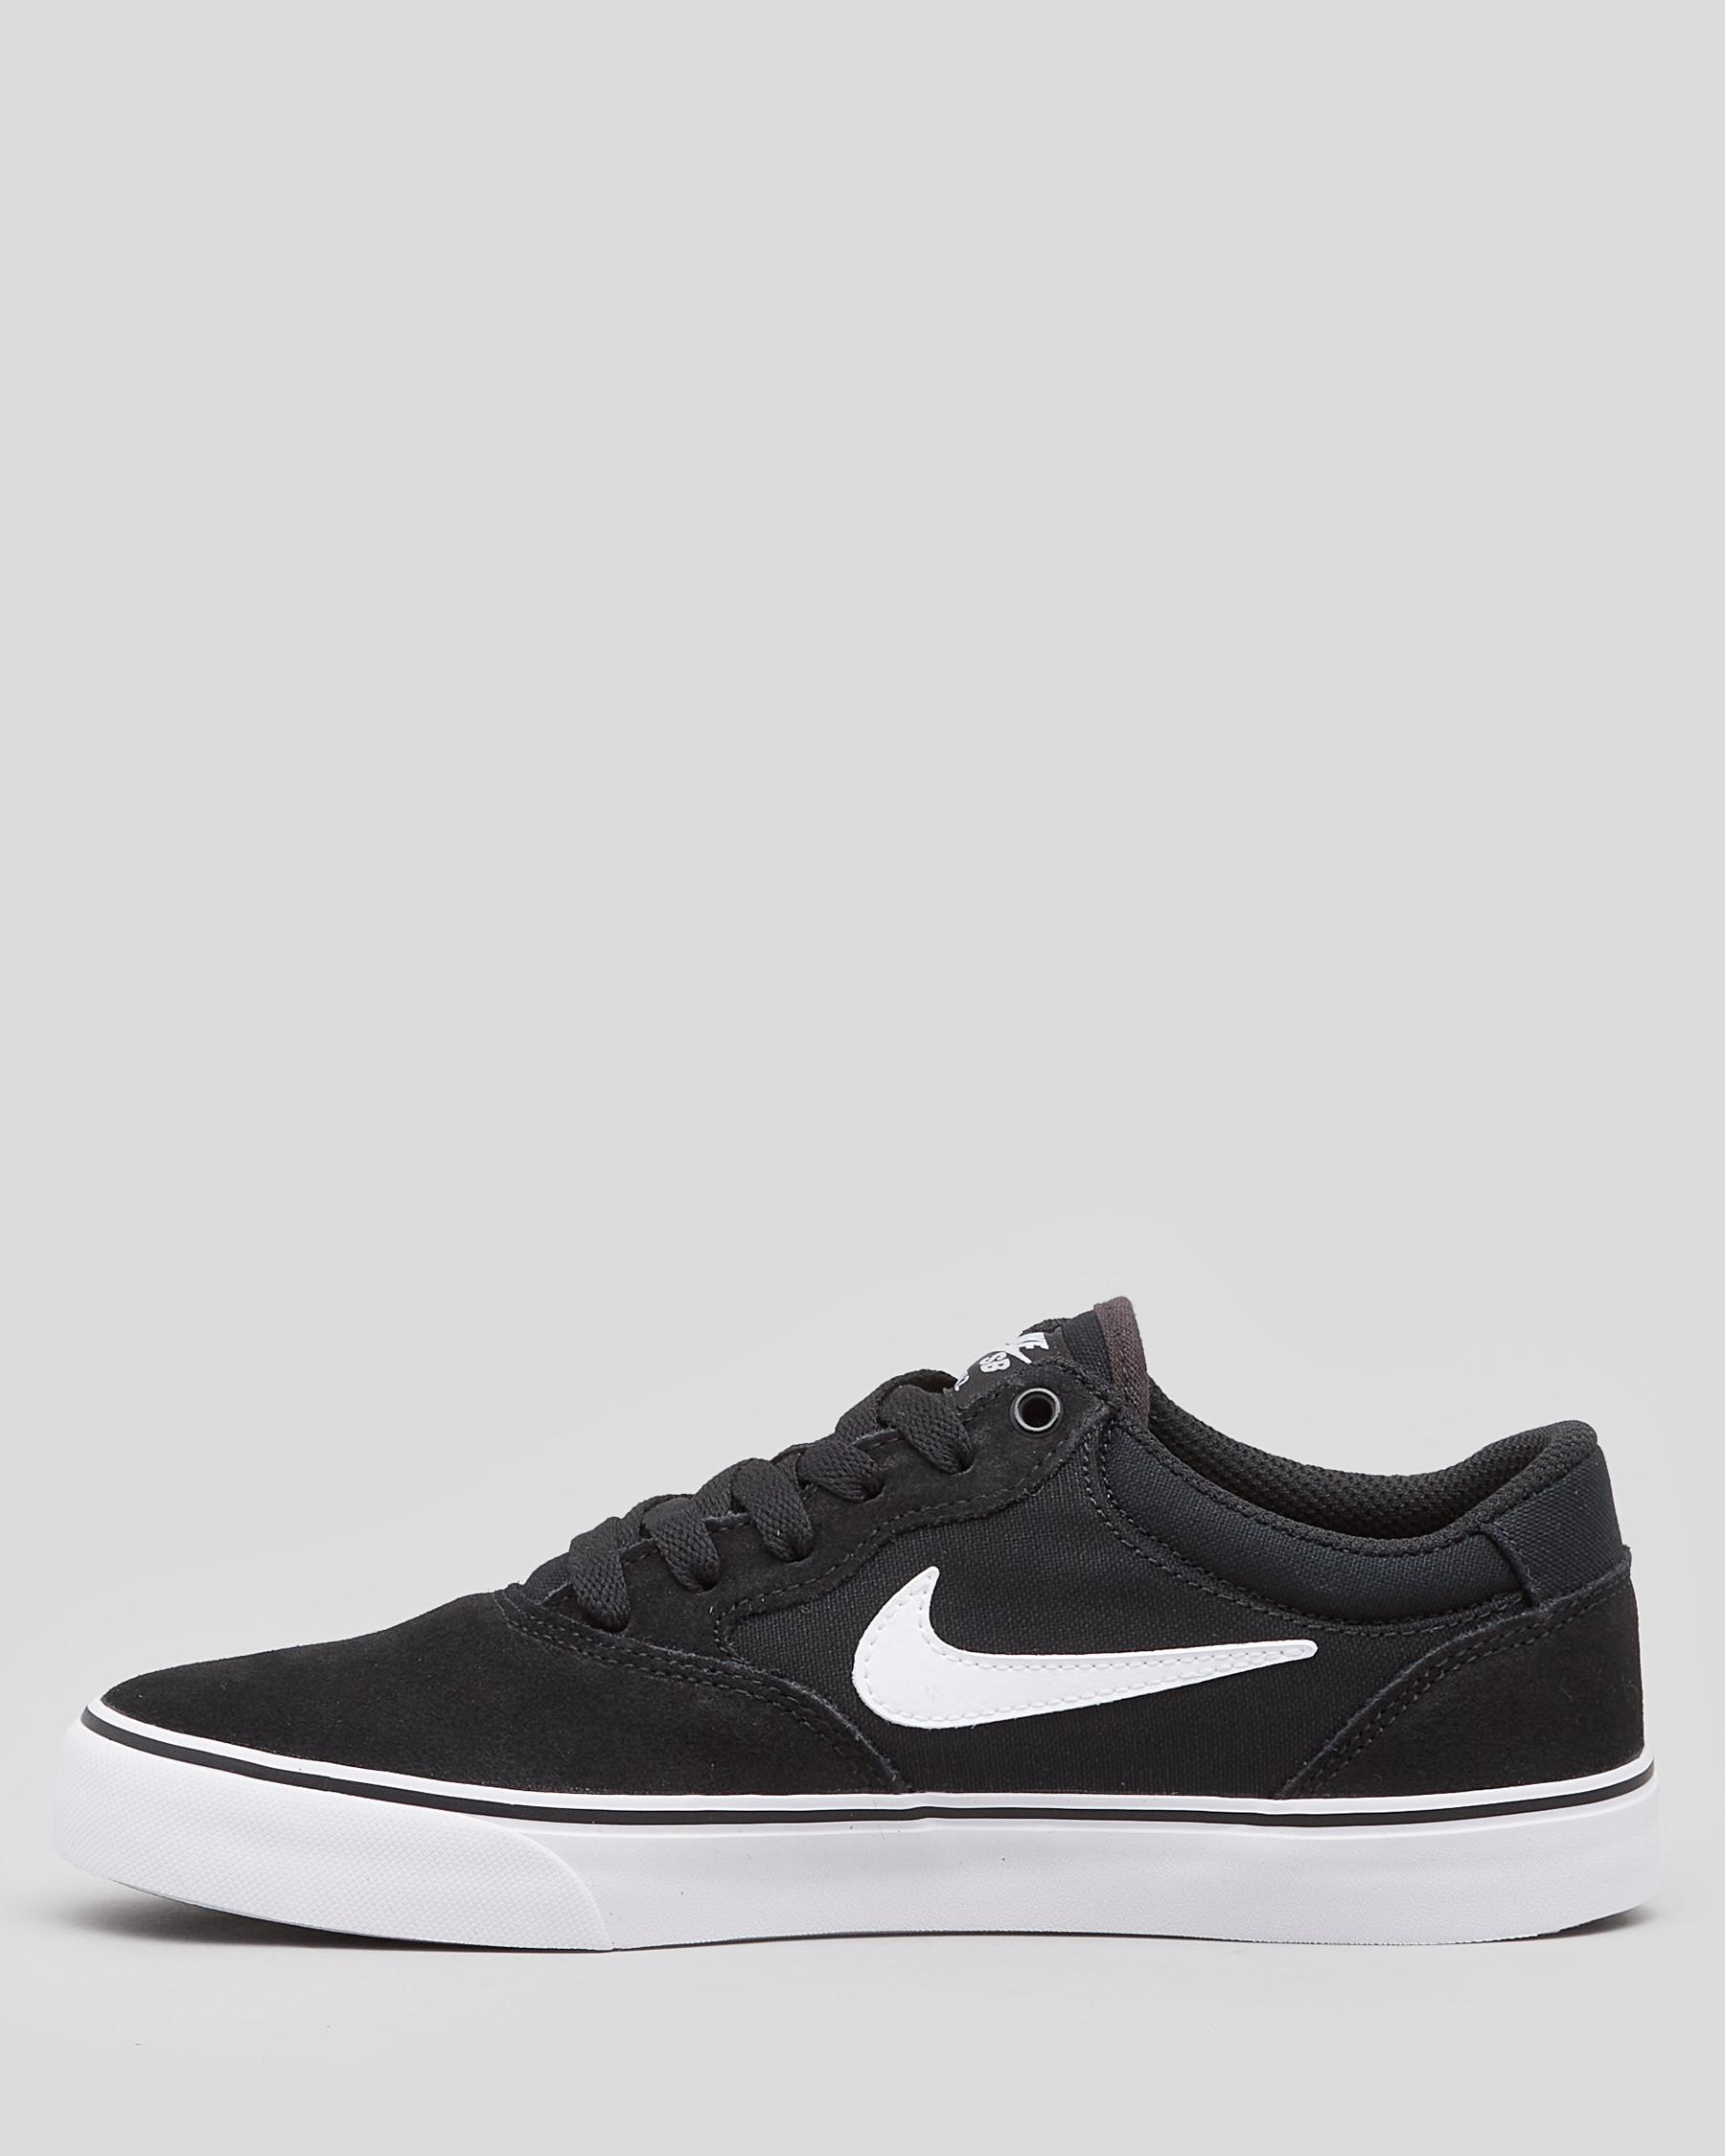 Nike Womens Chron 2 Canvas Shoes In Black/white - Fast Shipping & Easy ...